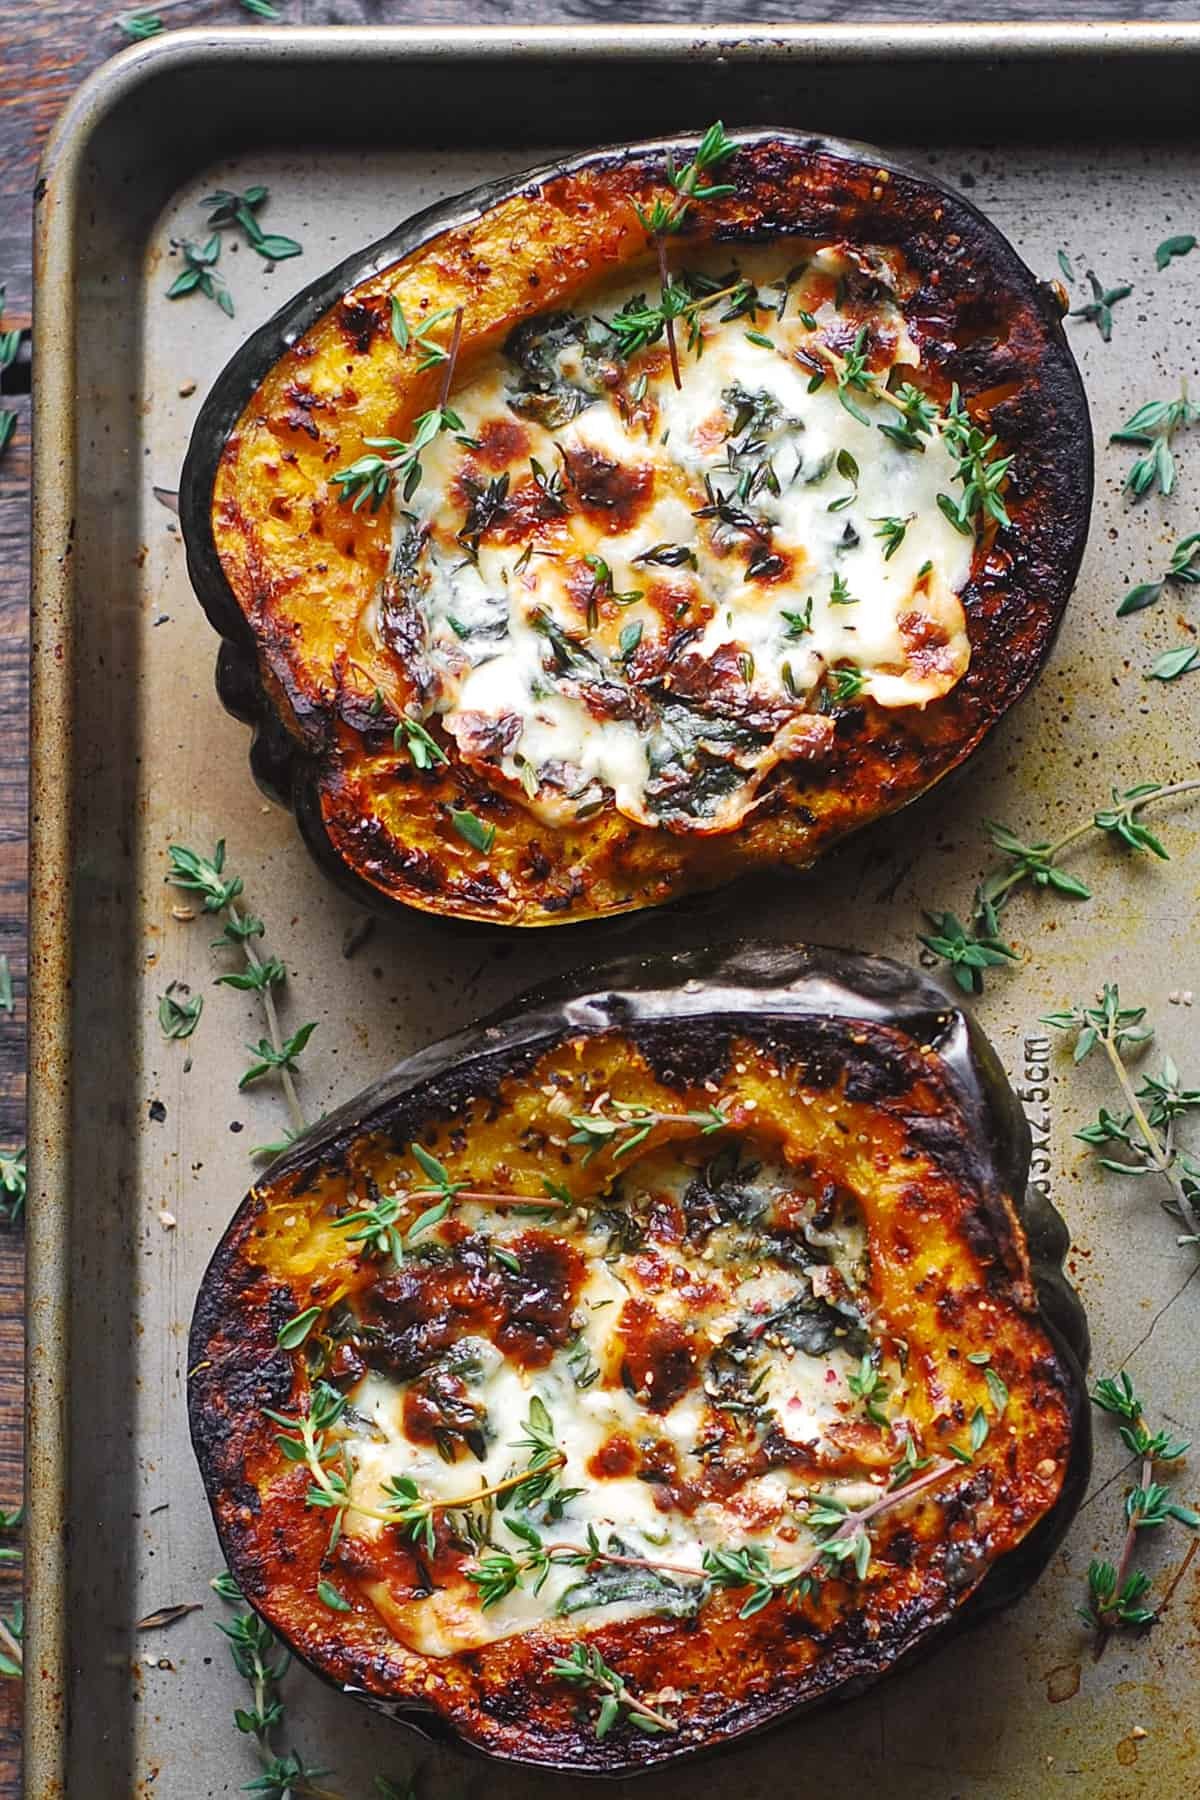 Spinach and Cheese Stuffed Acorn Squash